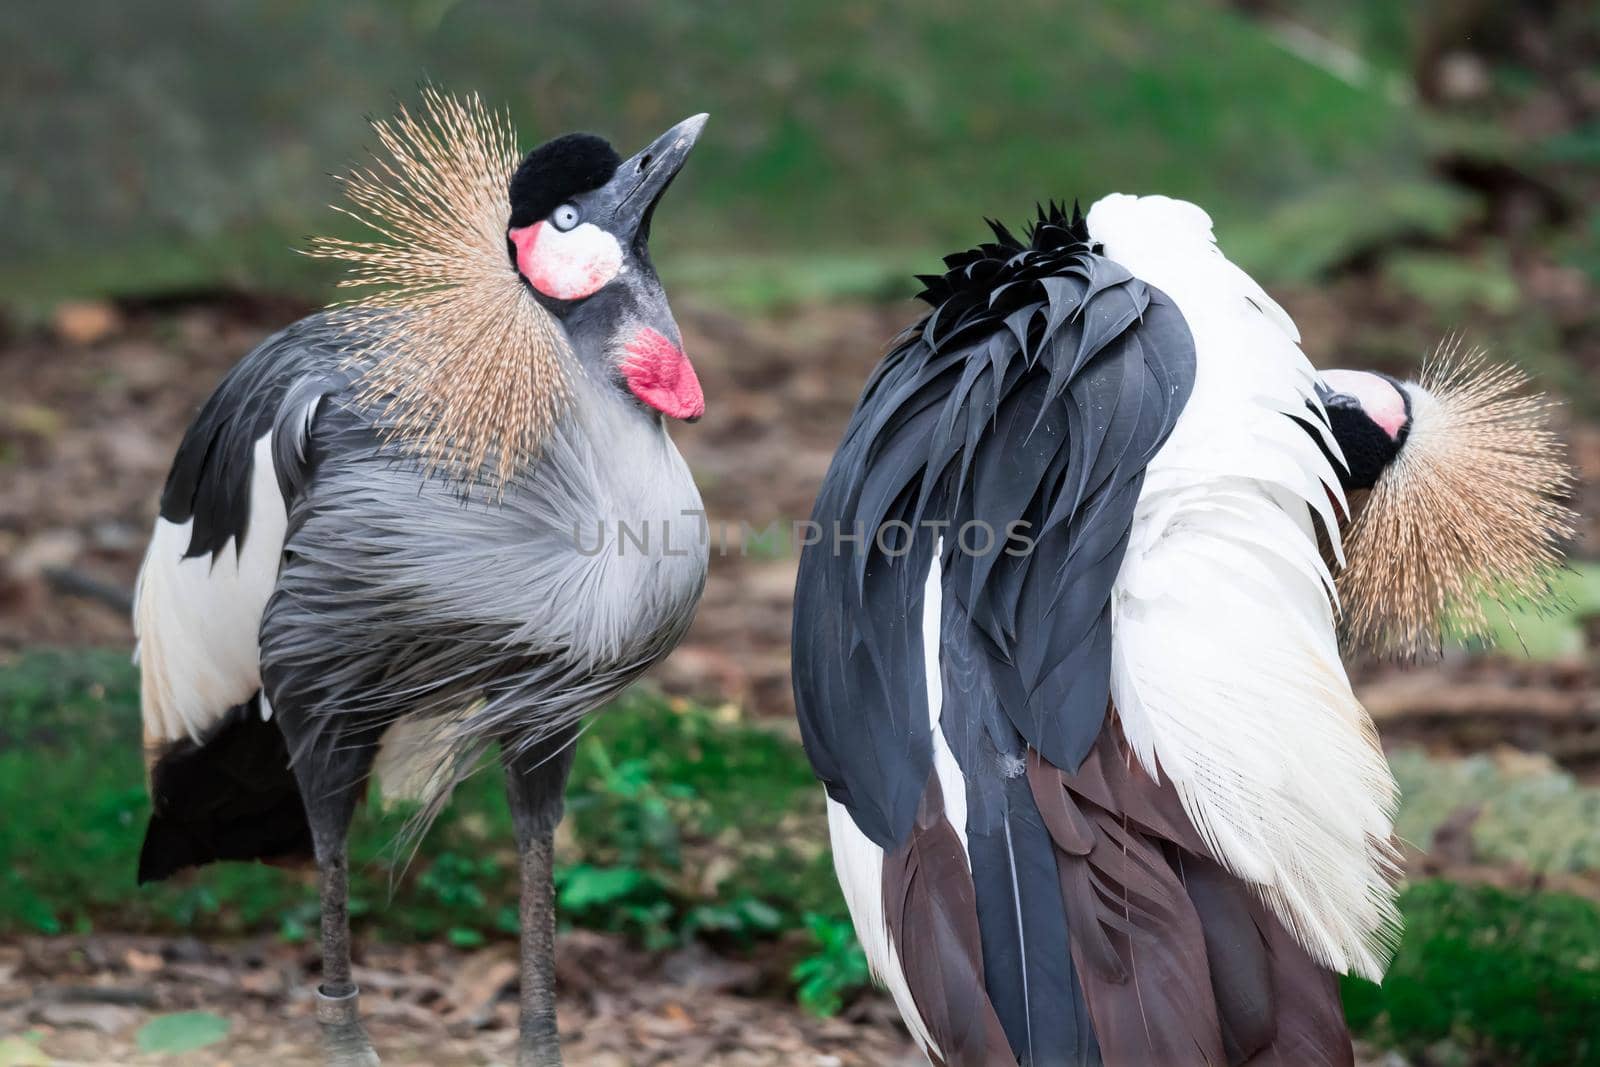 A Grey crowned crane, also known as the African crowned crane, golden crested crane, golden crowned crane, East African crane, East African crowned crane, Eastern crowned crane, South African crane